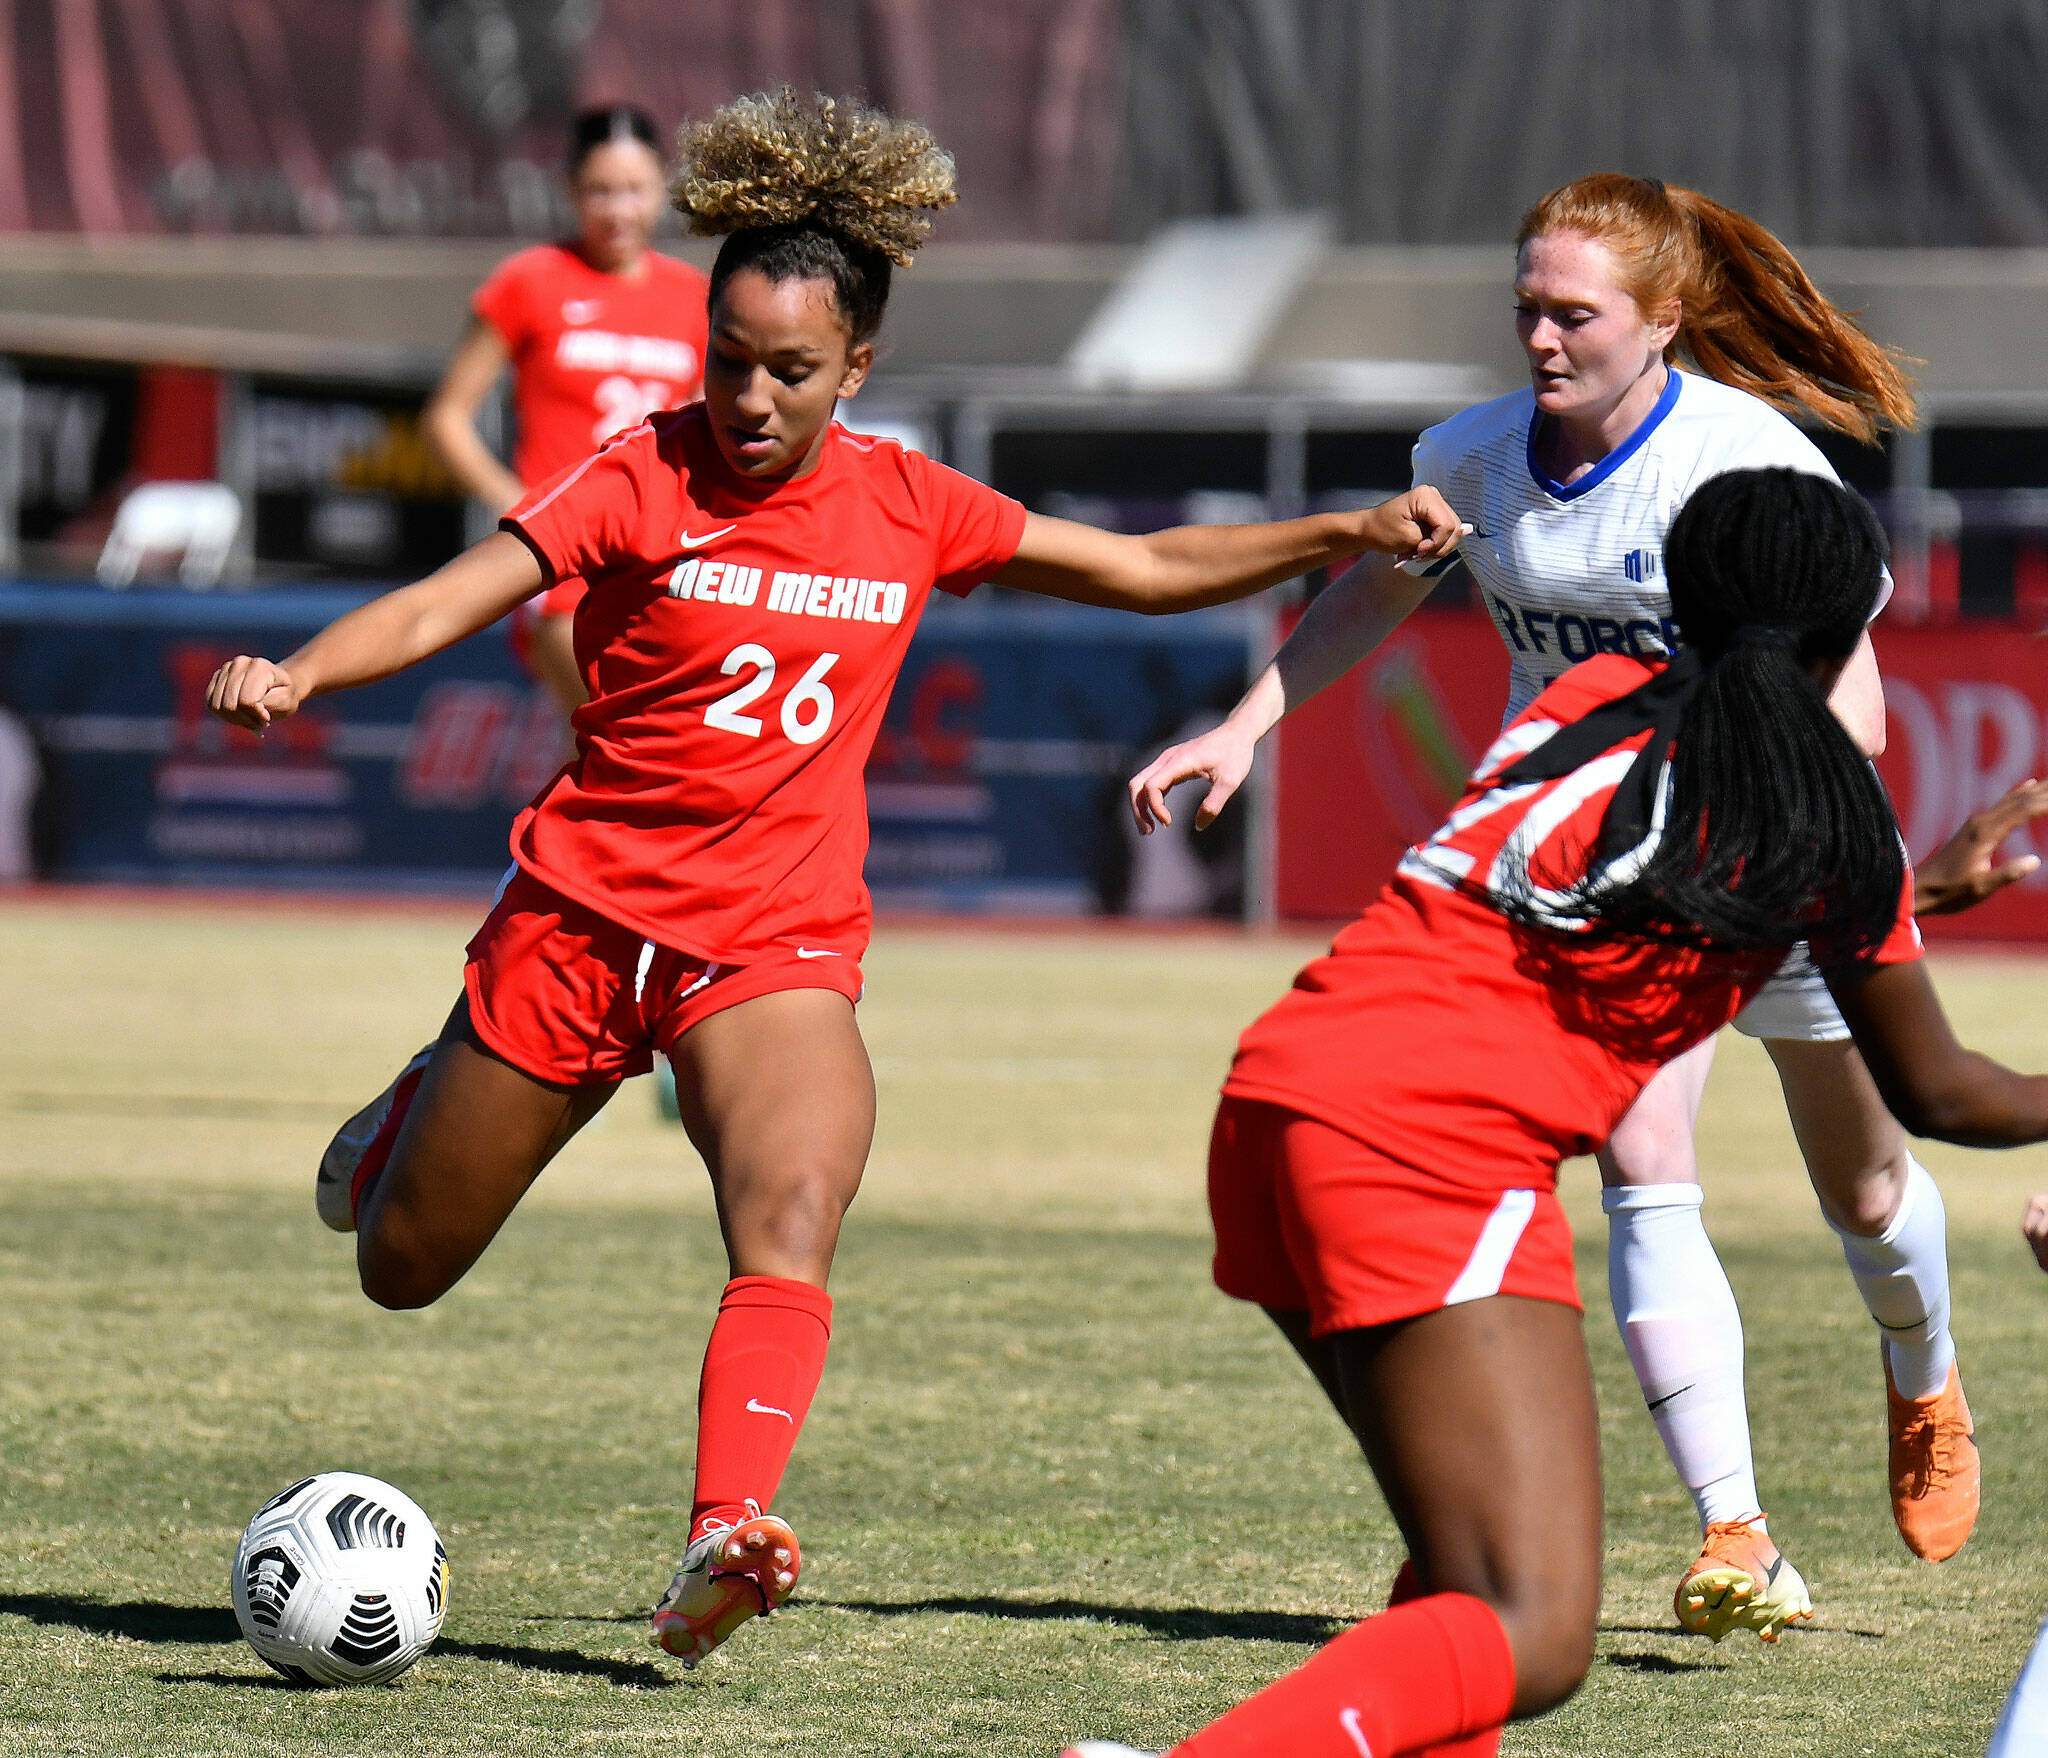 Jackson grad leading charge for New Mexico women's soccer | HeraldNet.com